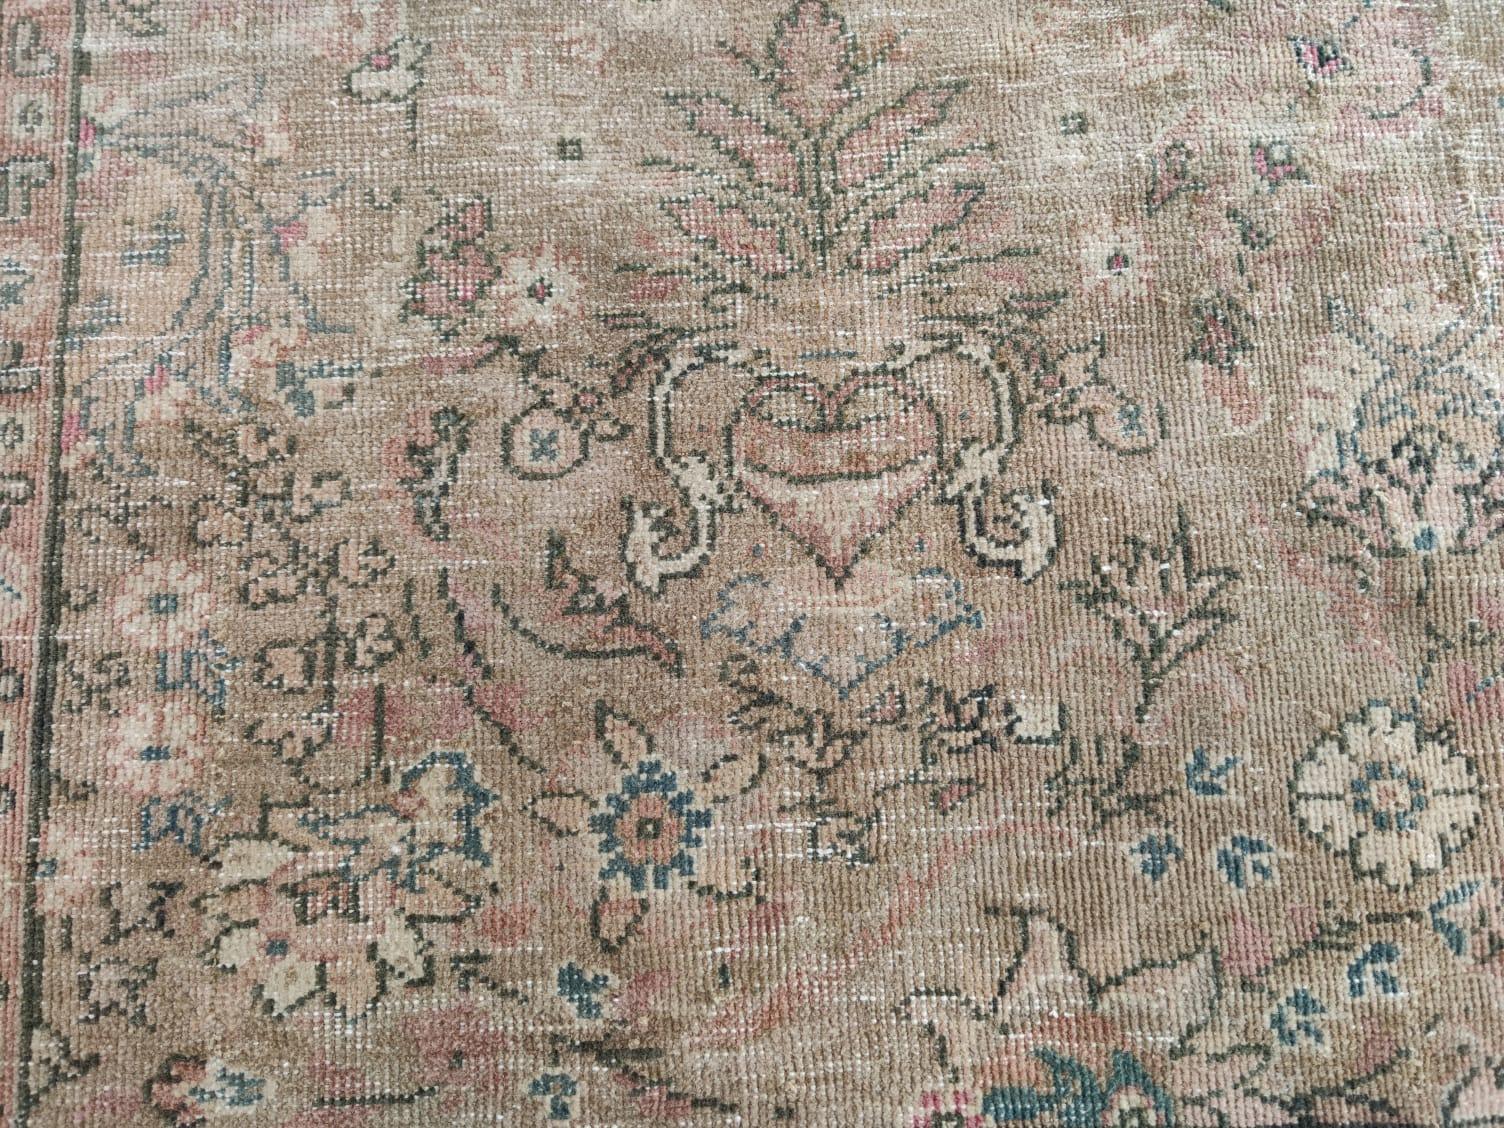 Hand-Woven 8.5x11 Ft Vintage Handmade Floral Pattern Turkish Wool Area Rug in Tawny Brown